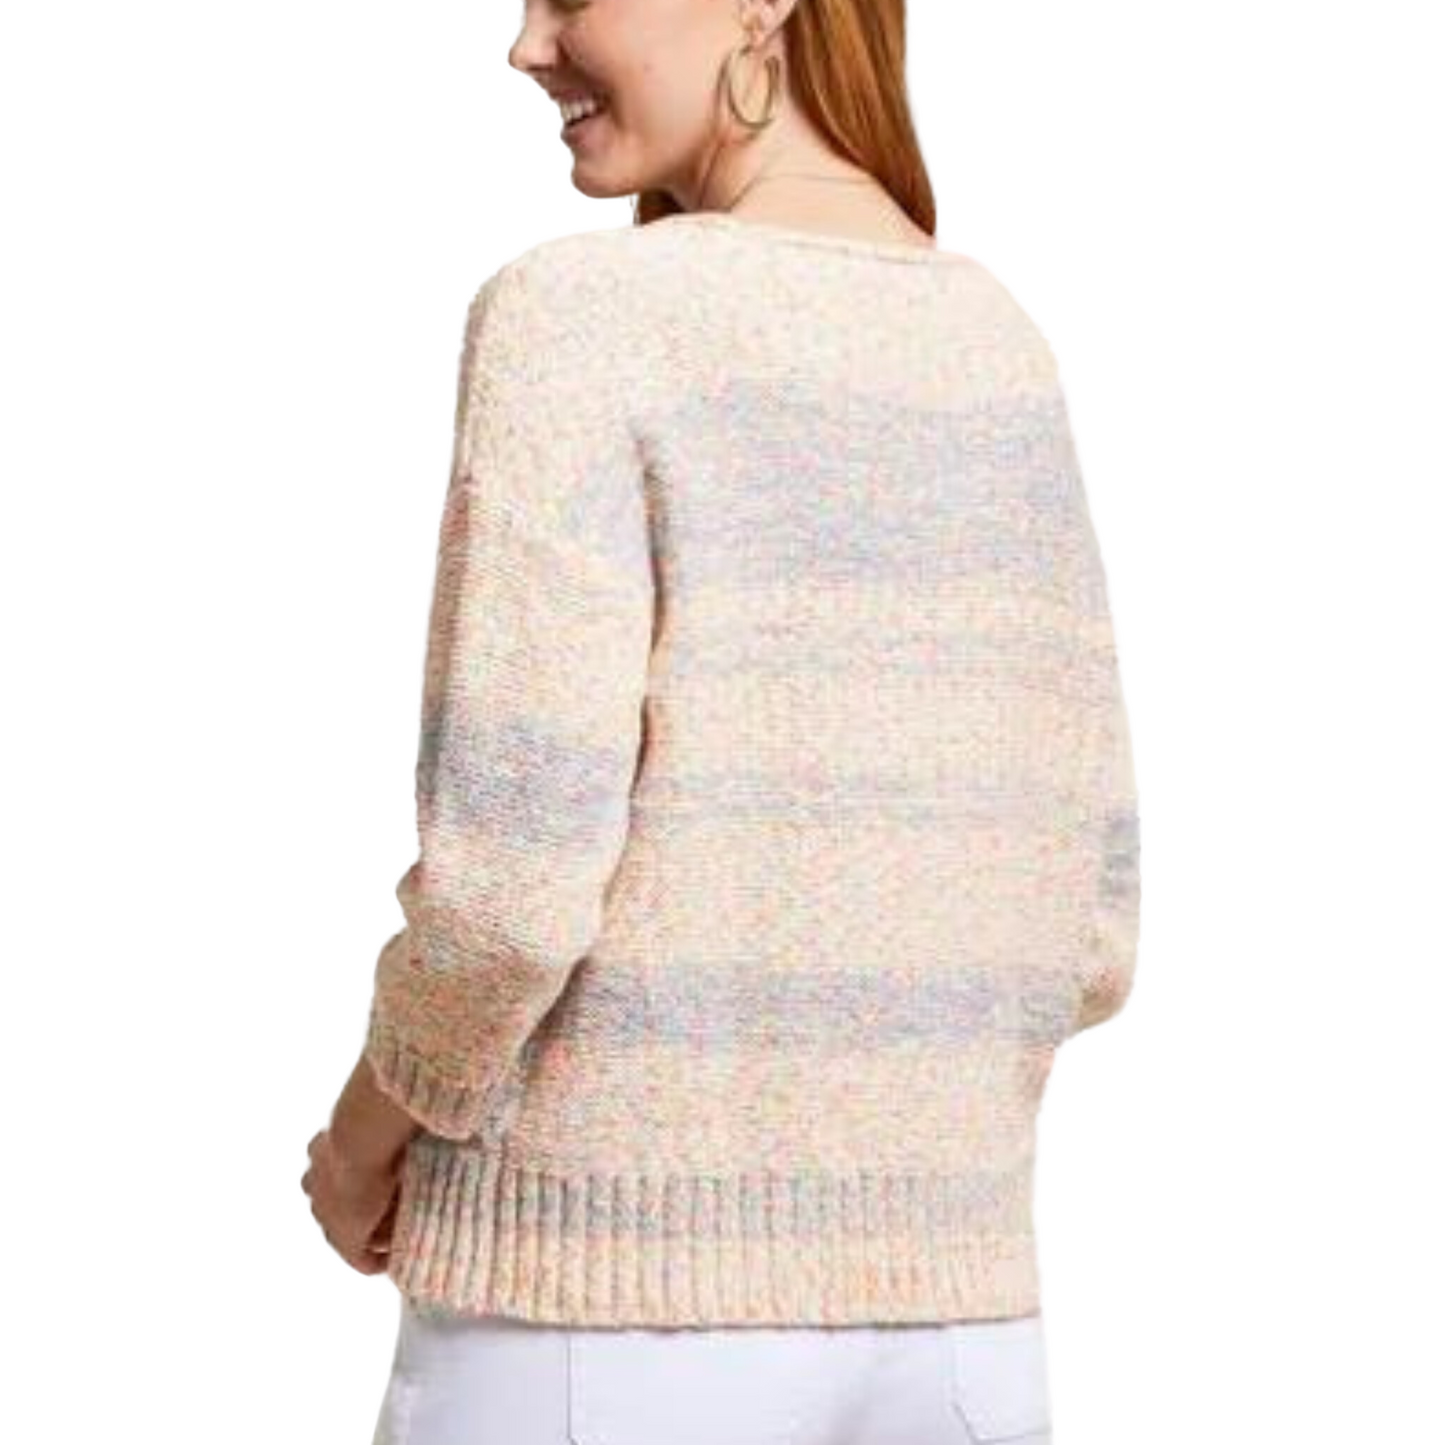 This lightweight 3/4 sleeve sweater features a classic scoop neckline and a stylish palm tree pattern knit into the fabric. Its cozy fabric makes it perfect for year-round wear.